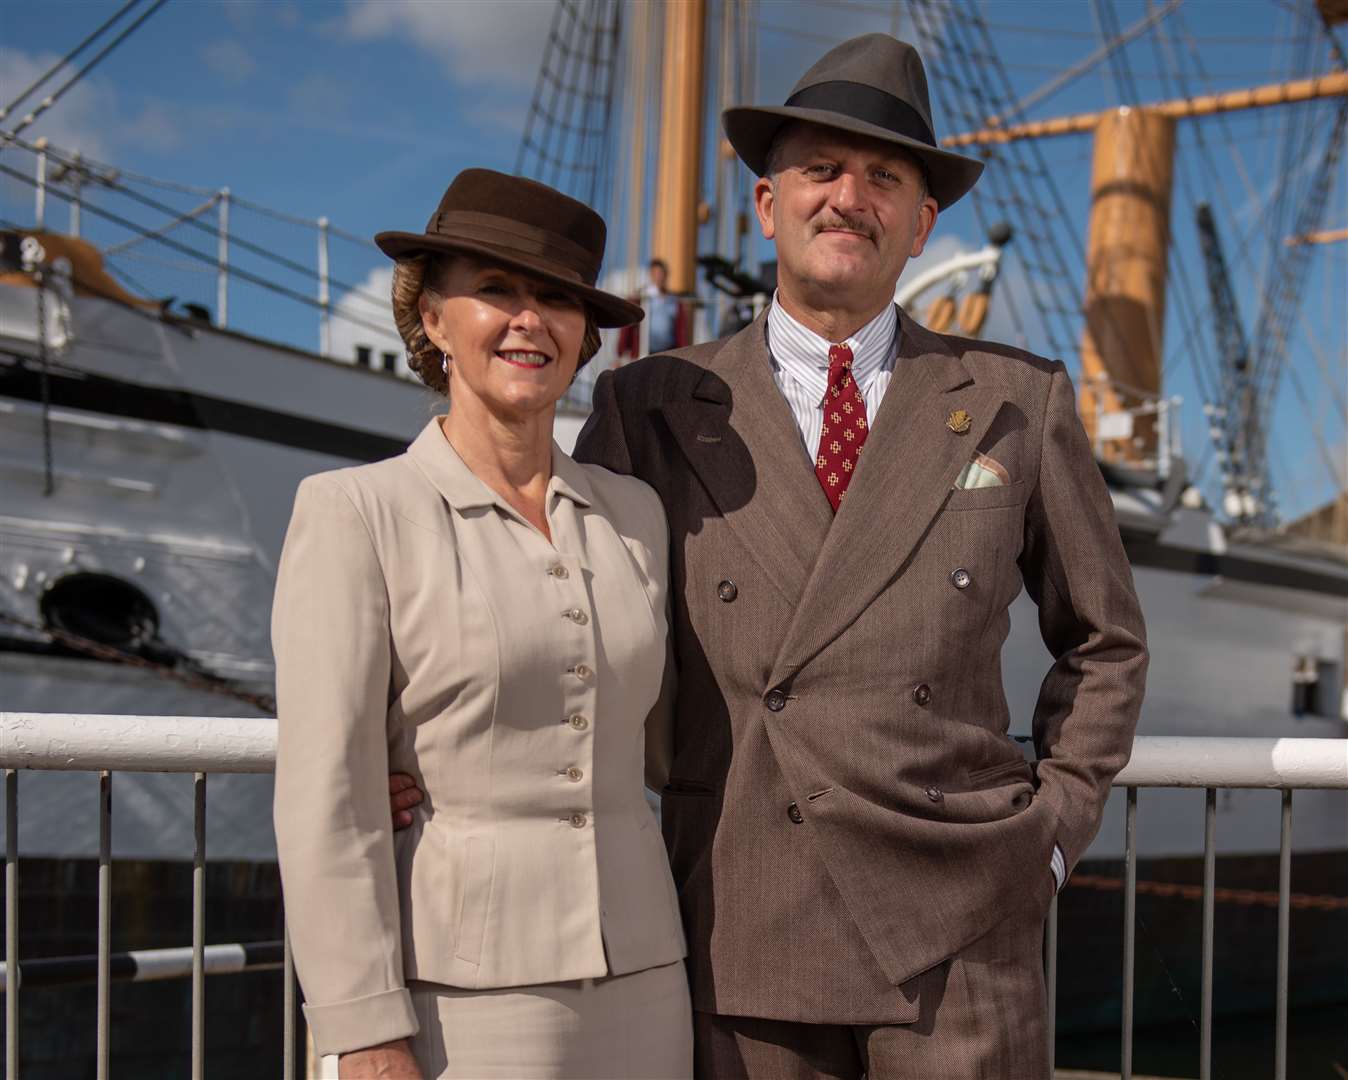 Wear your 40s finery Picture: Tim Smith